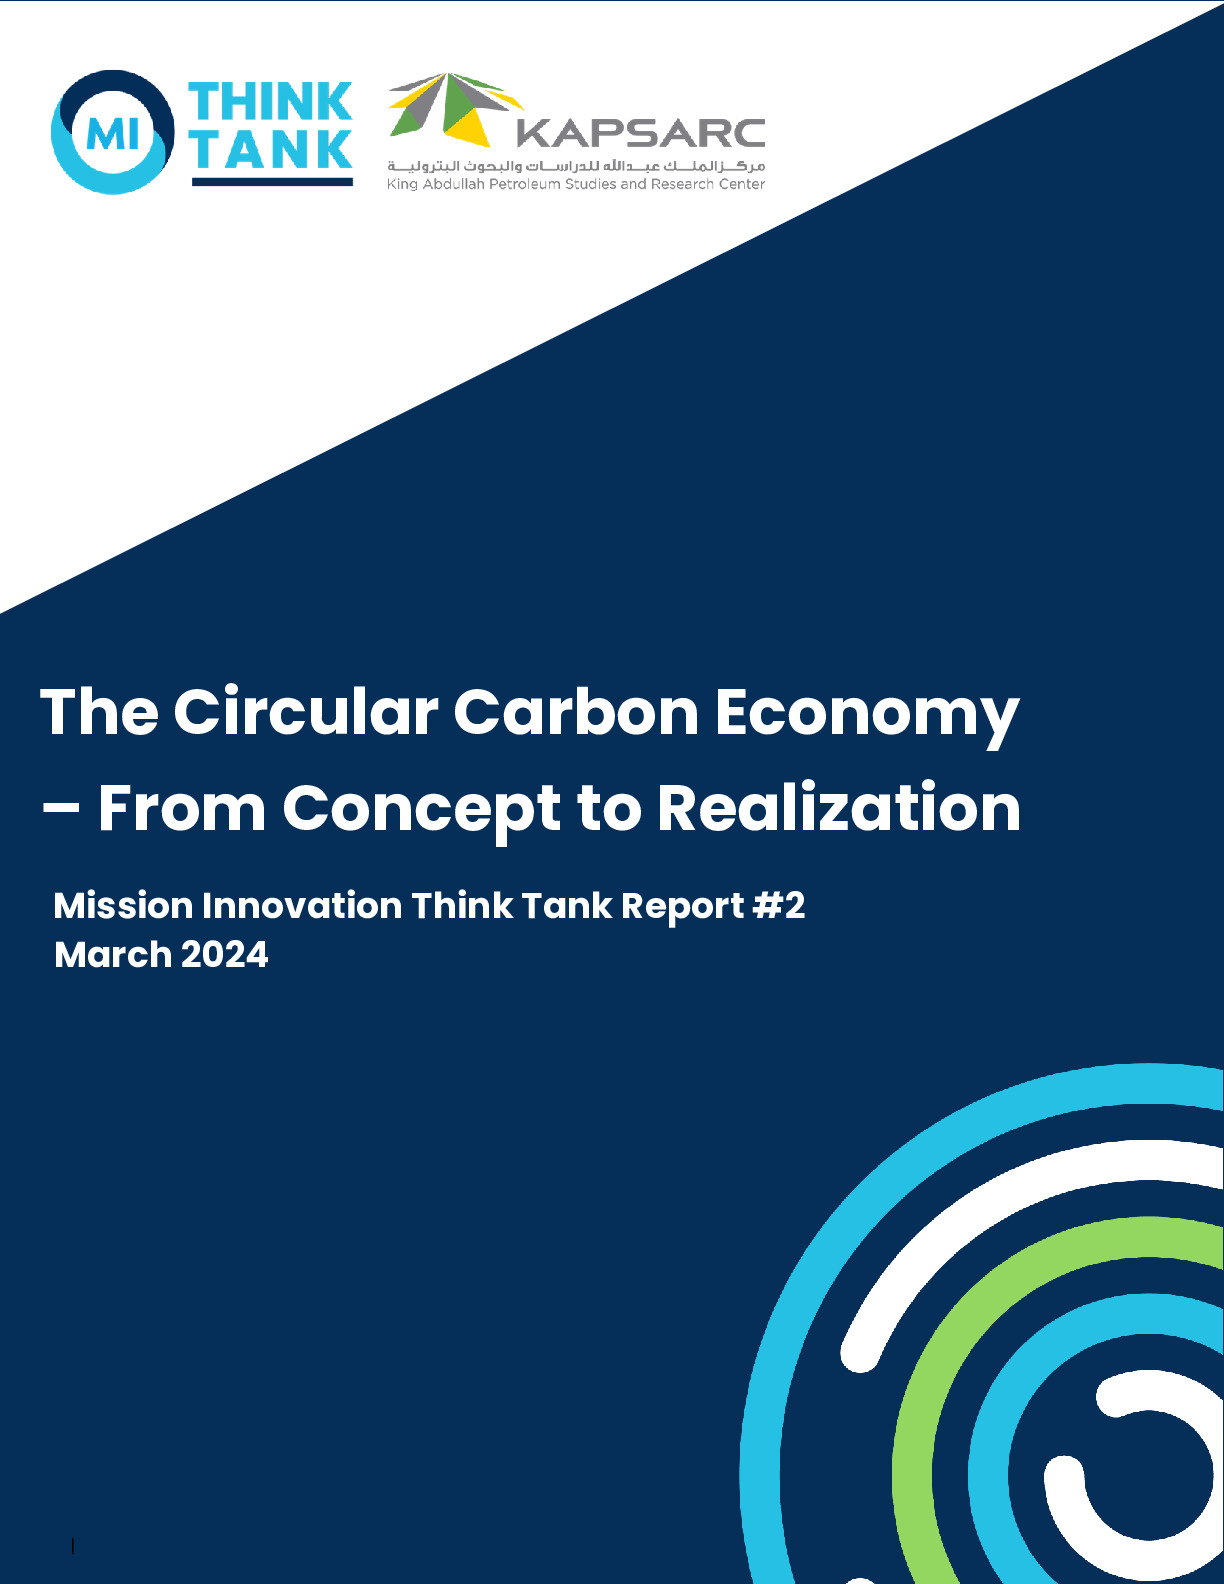 The Circular Carbon Economy – From Concept to Realization